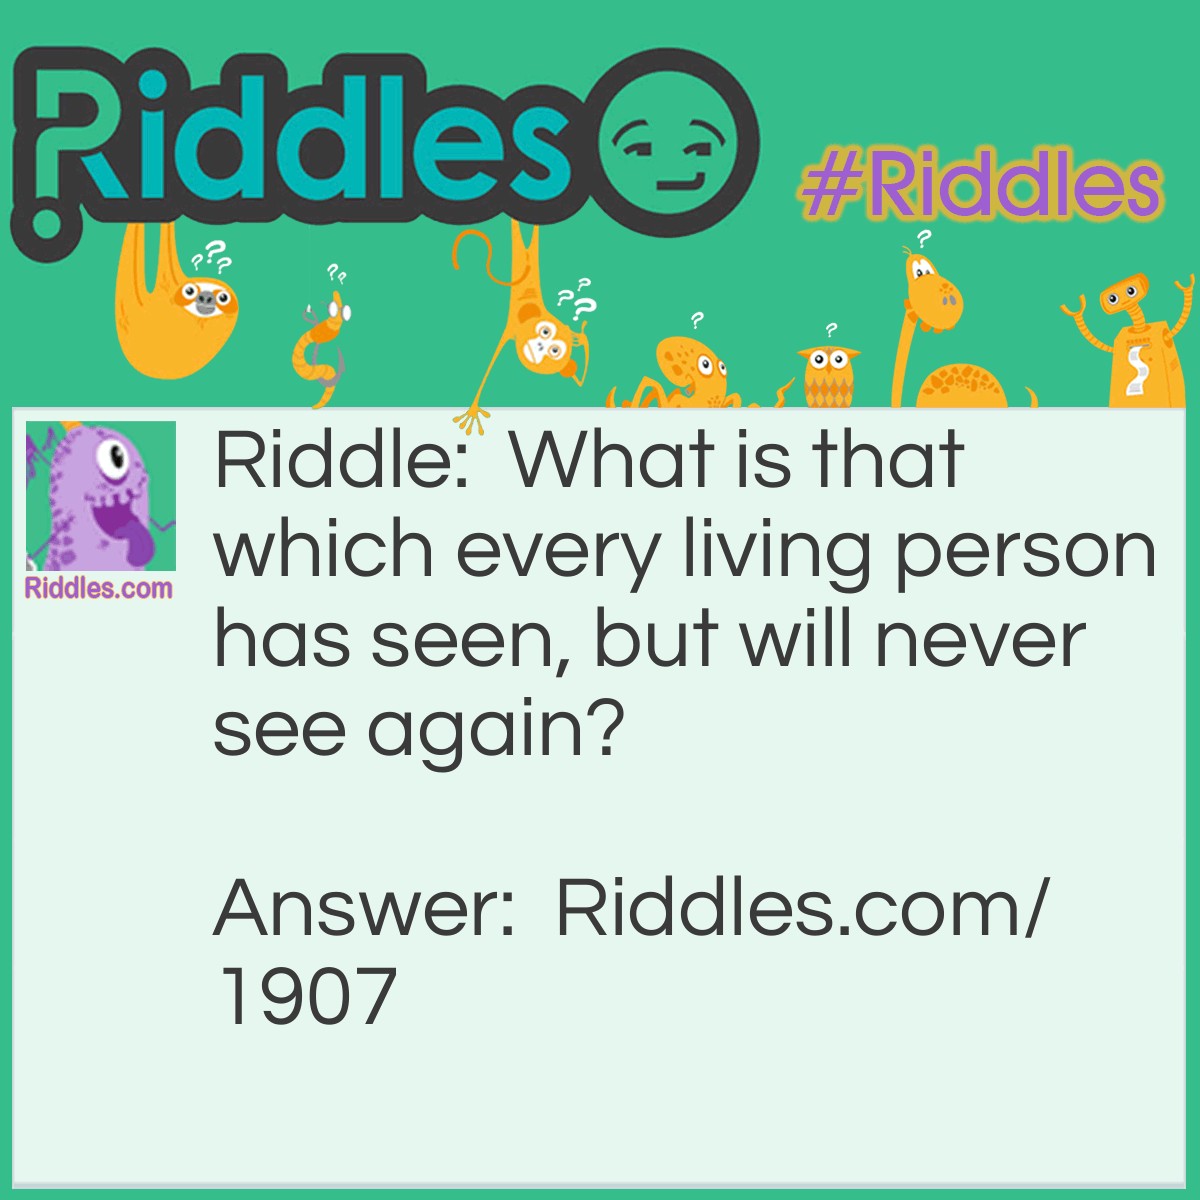 Riddle: What is that which every living person has seen, but will never see again? Answer: Yesterday.